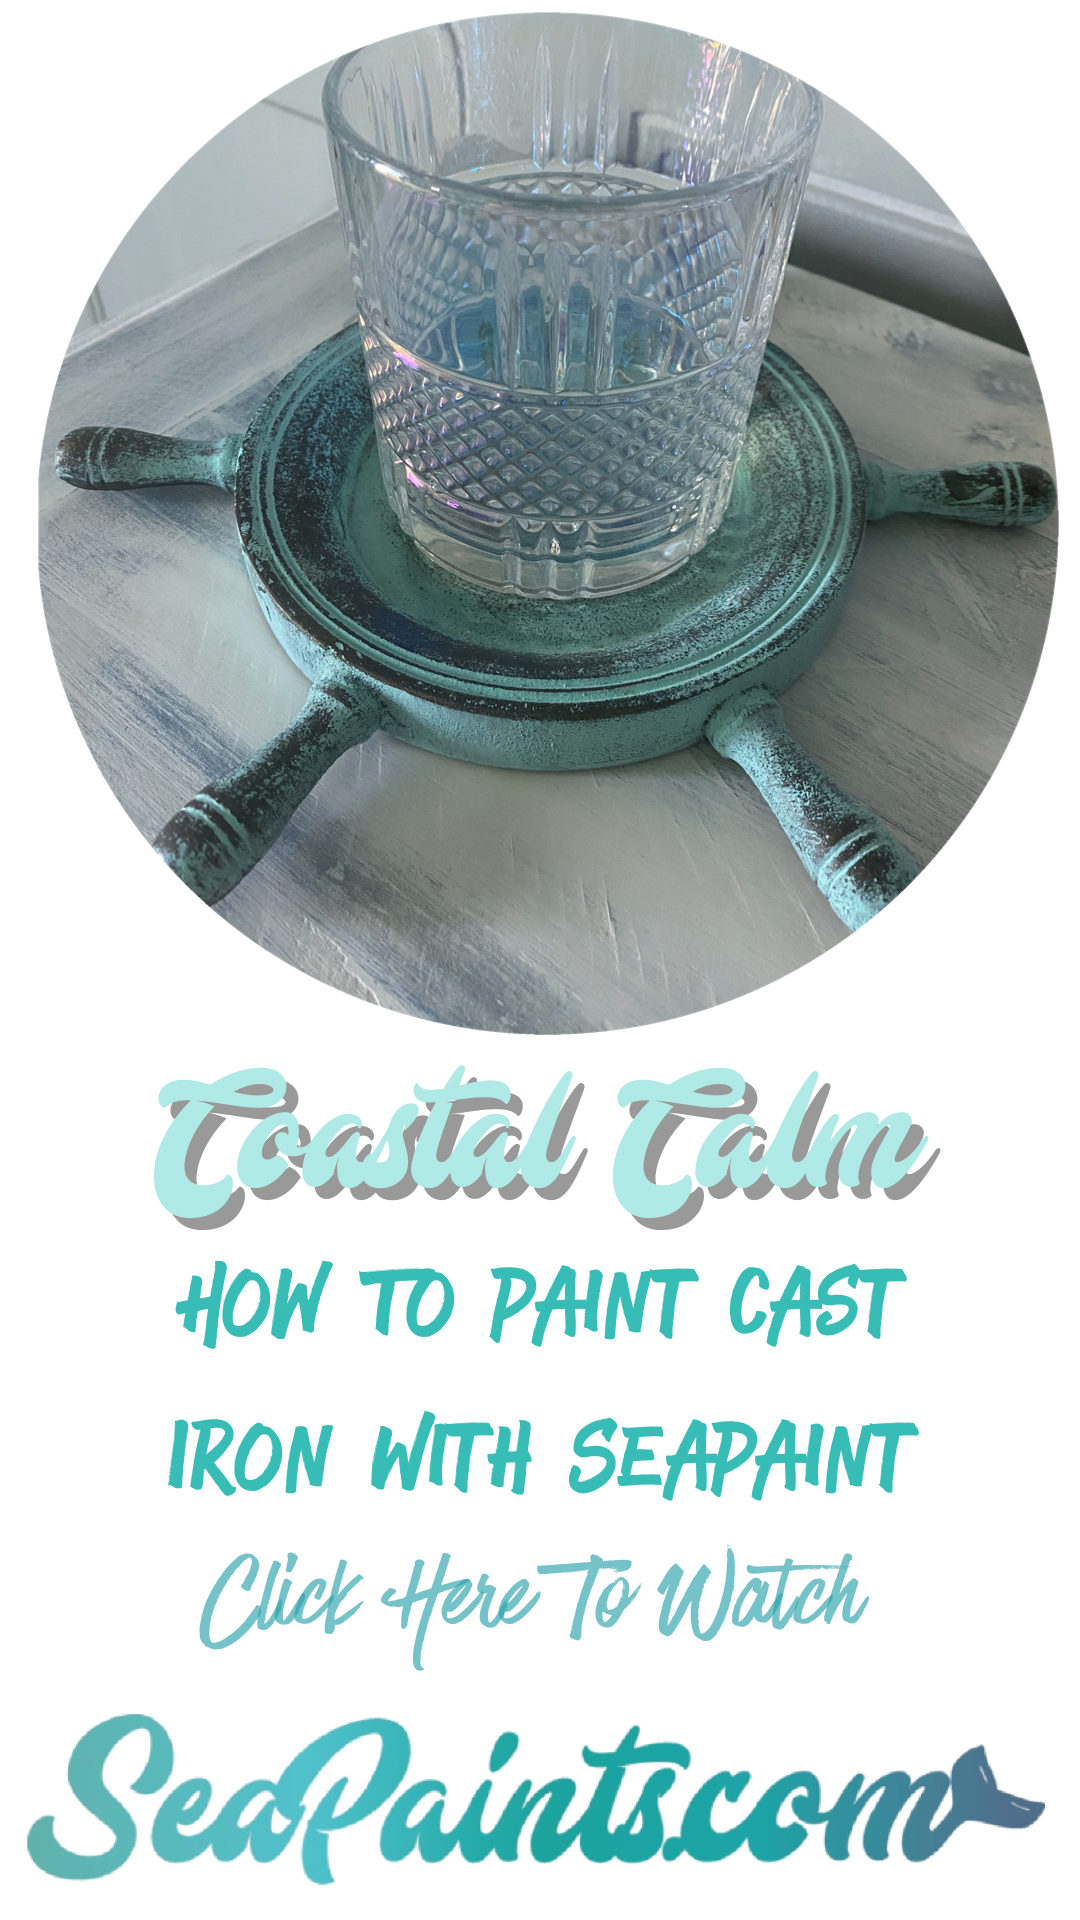 HOW TO PAINT CAST IRON WITH SEAPAINT